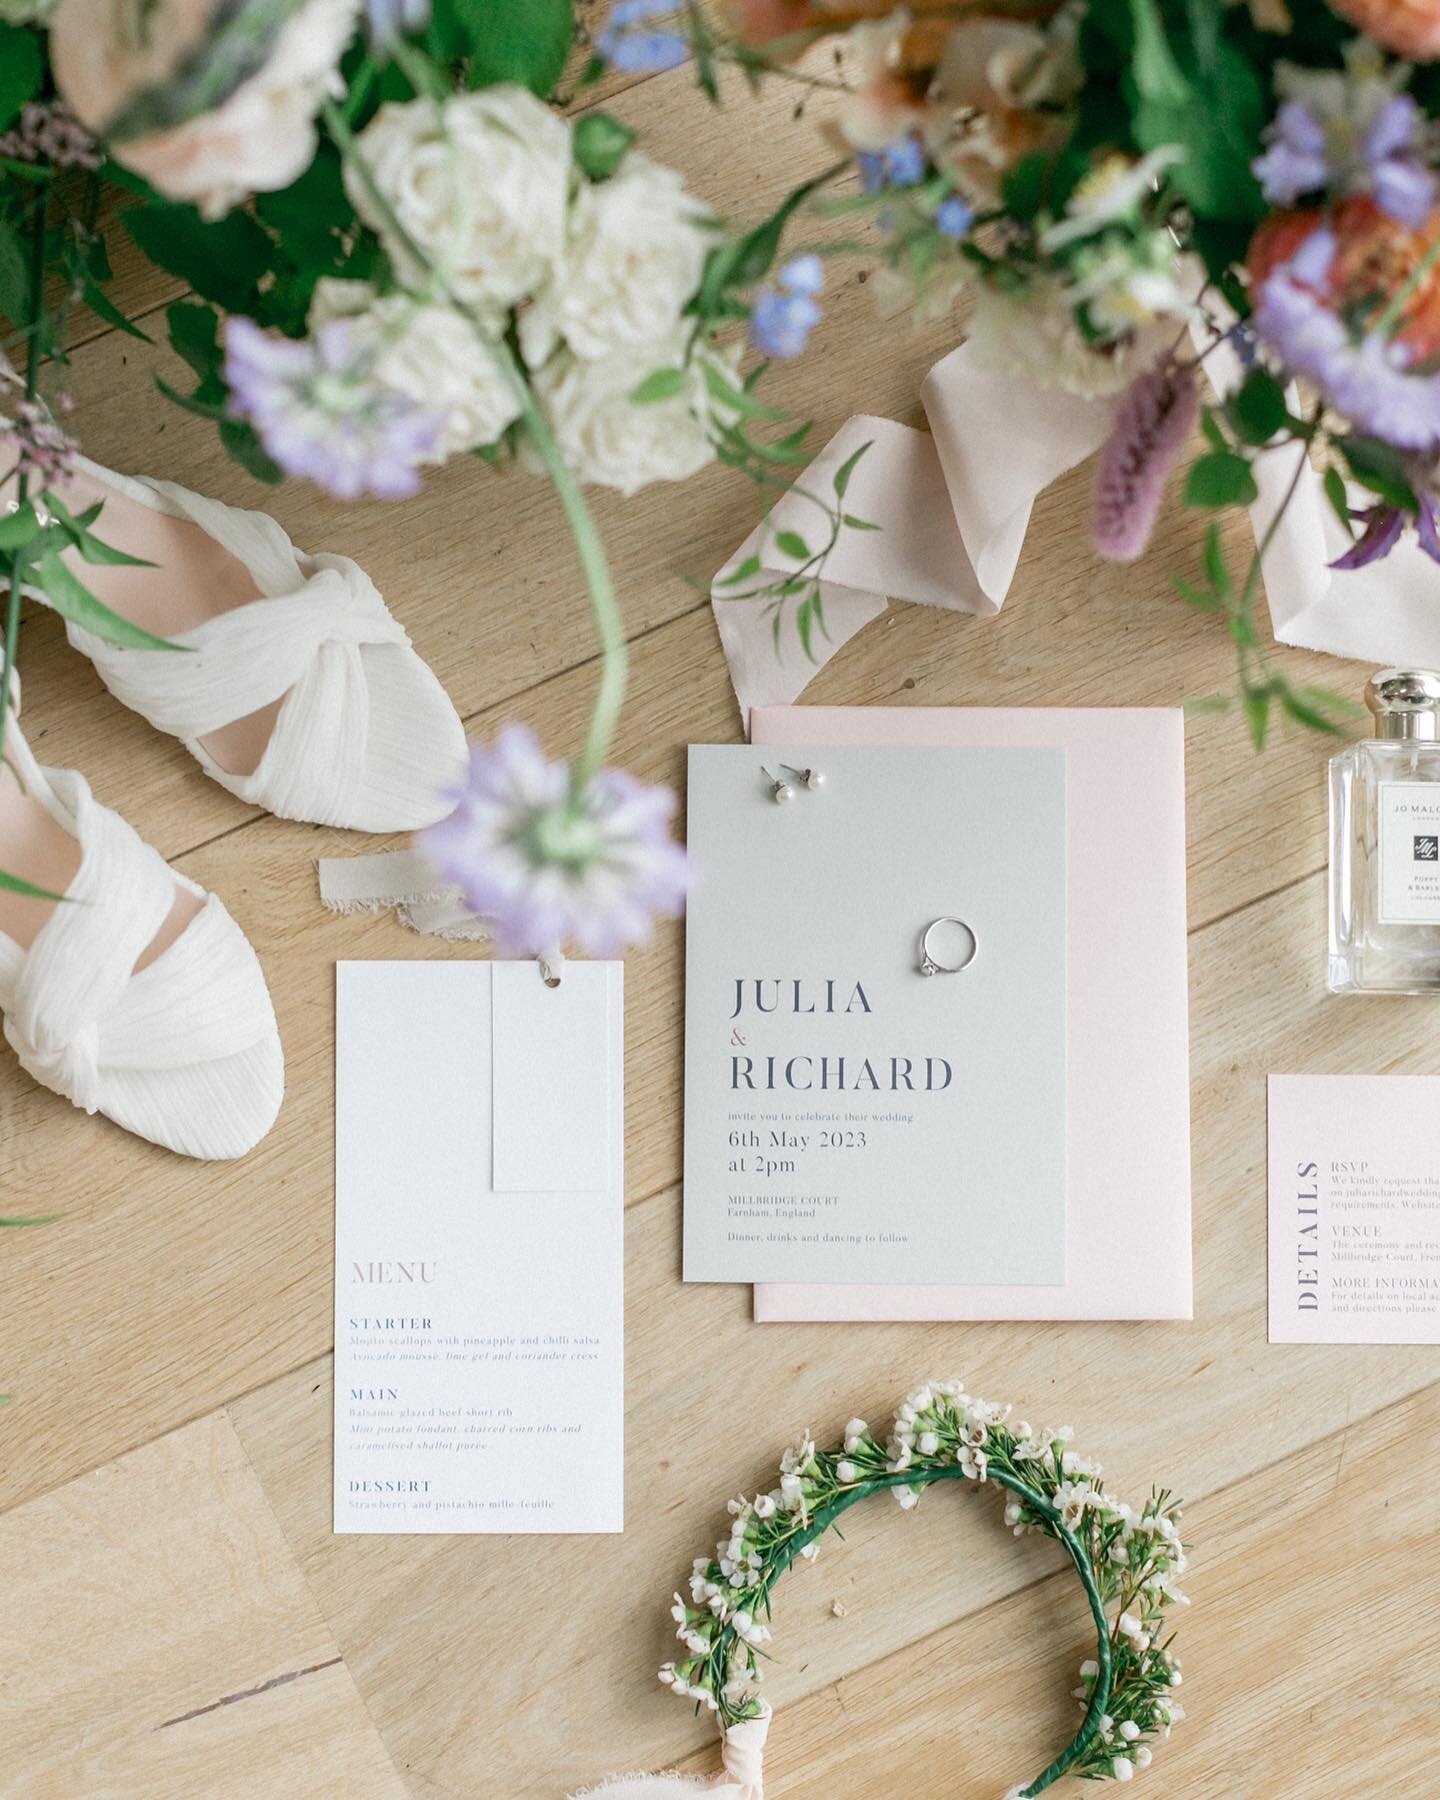 🤍Details🤍

Capturing the beautiful pastel bridal flowers, bespoke stationery and personal bride details on the morning of the wedding. Our first wedding of the year for J&amp;R, on the same day as the coronation. 

🌸 @poppywildfloral 
📸 @philippa